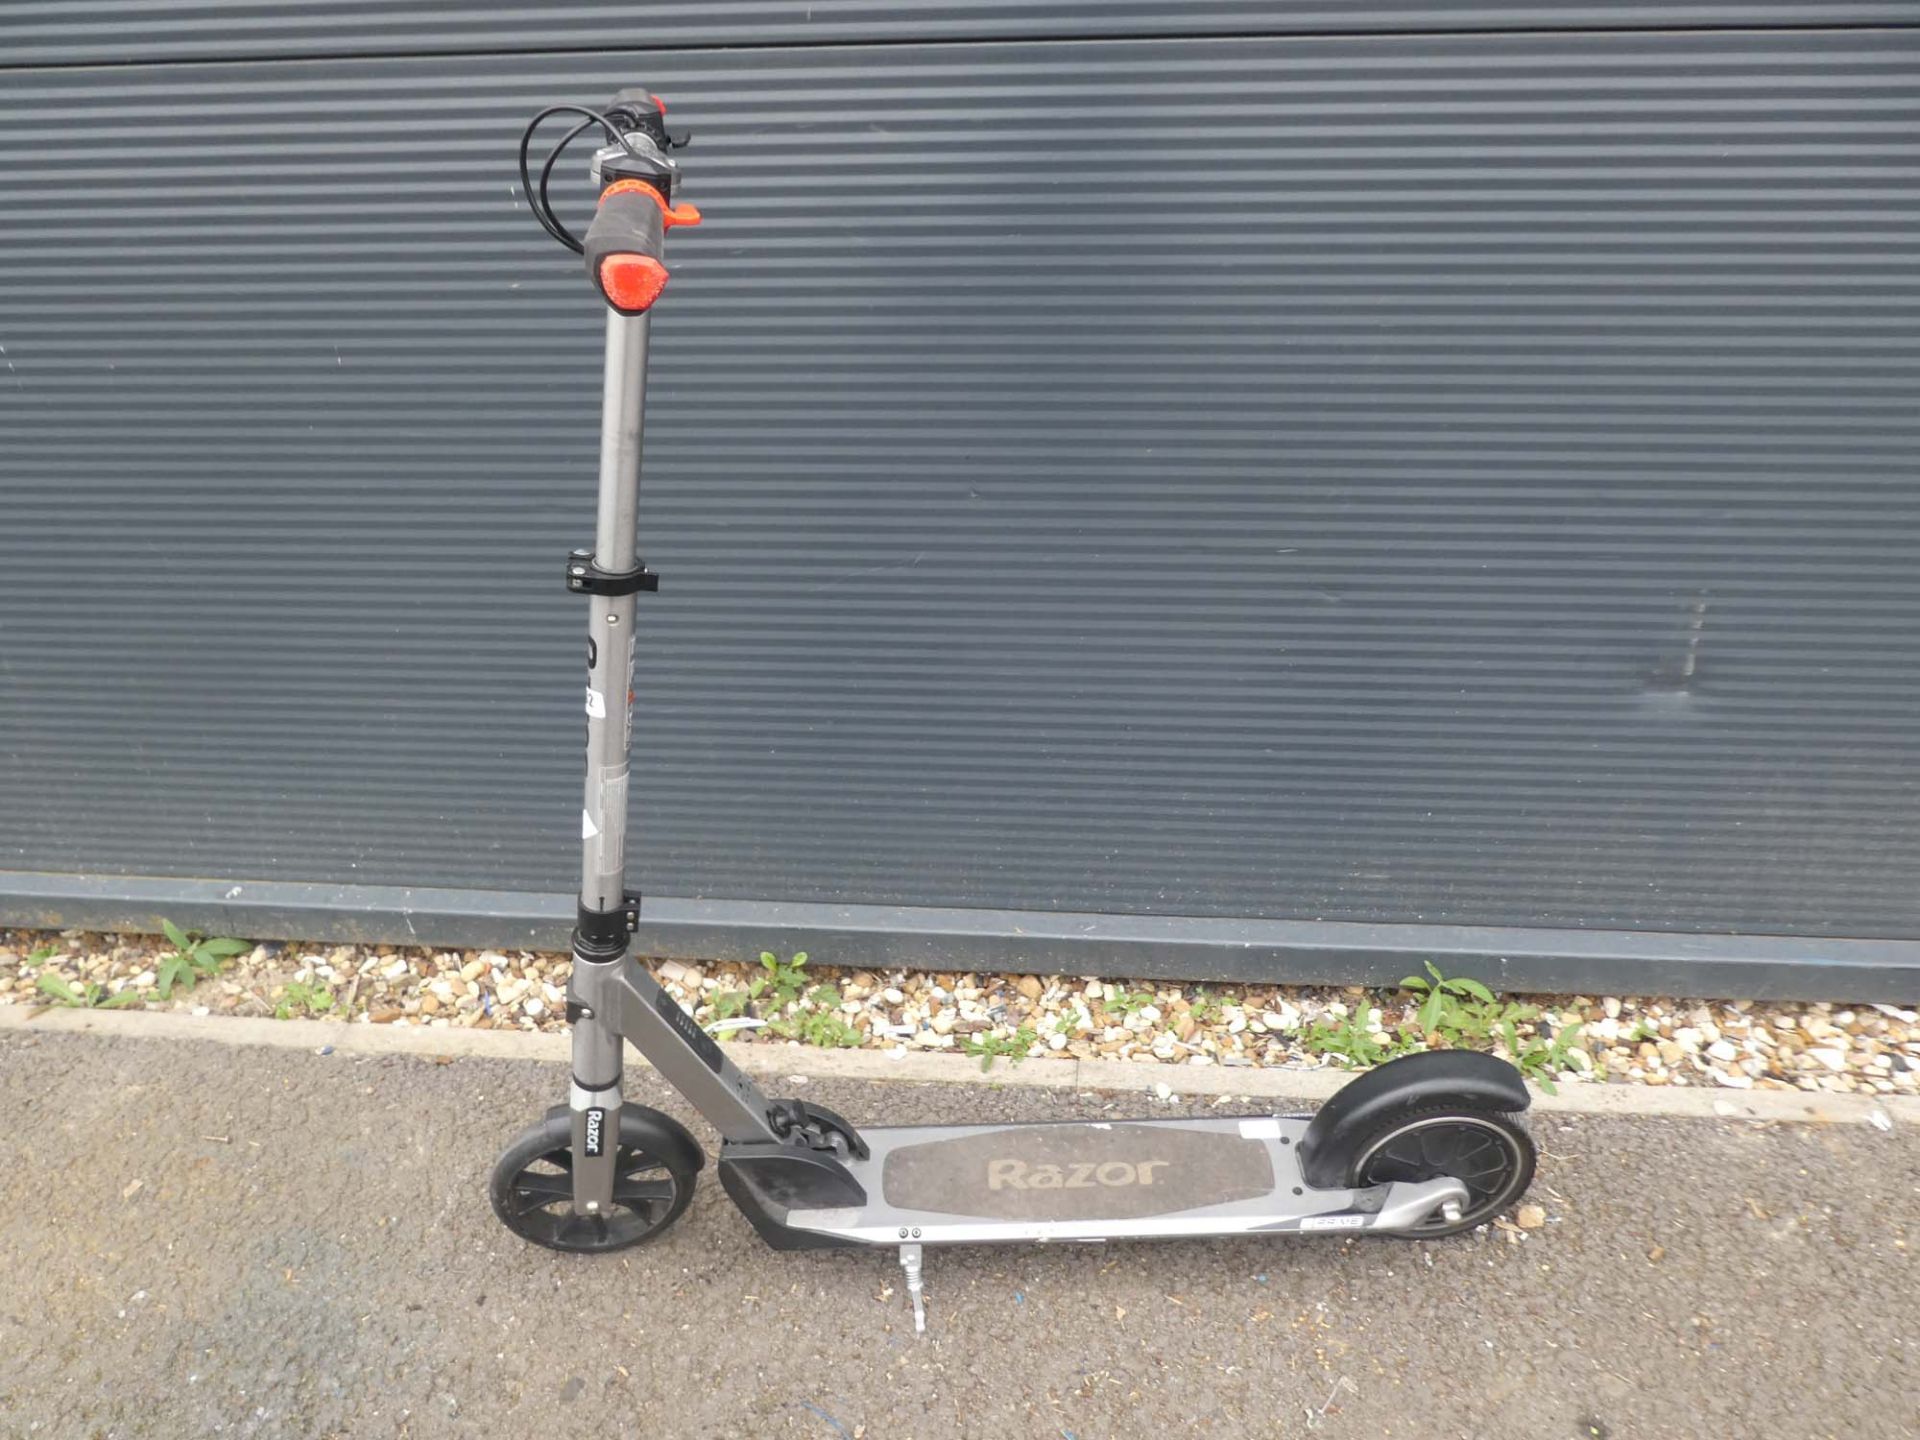 Razor electric scooter (no charger)